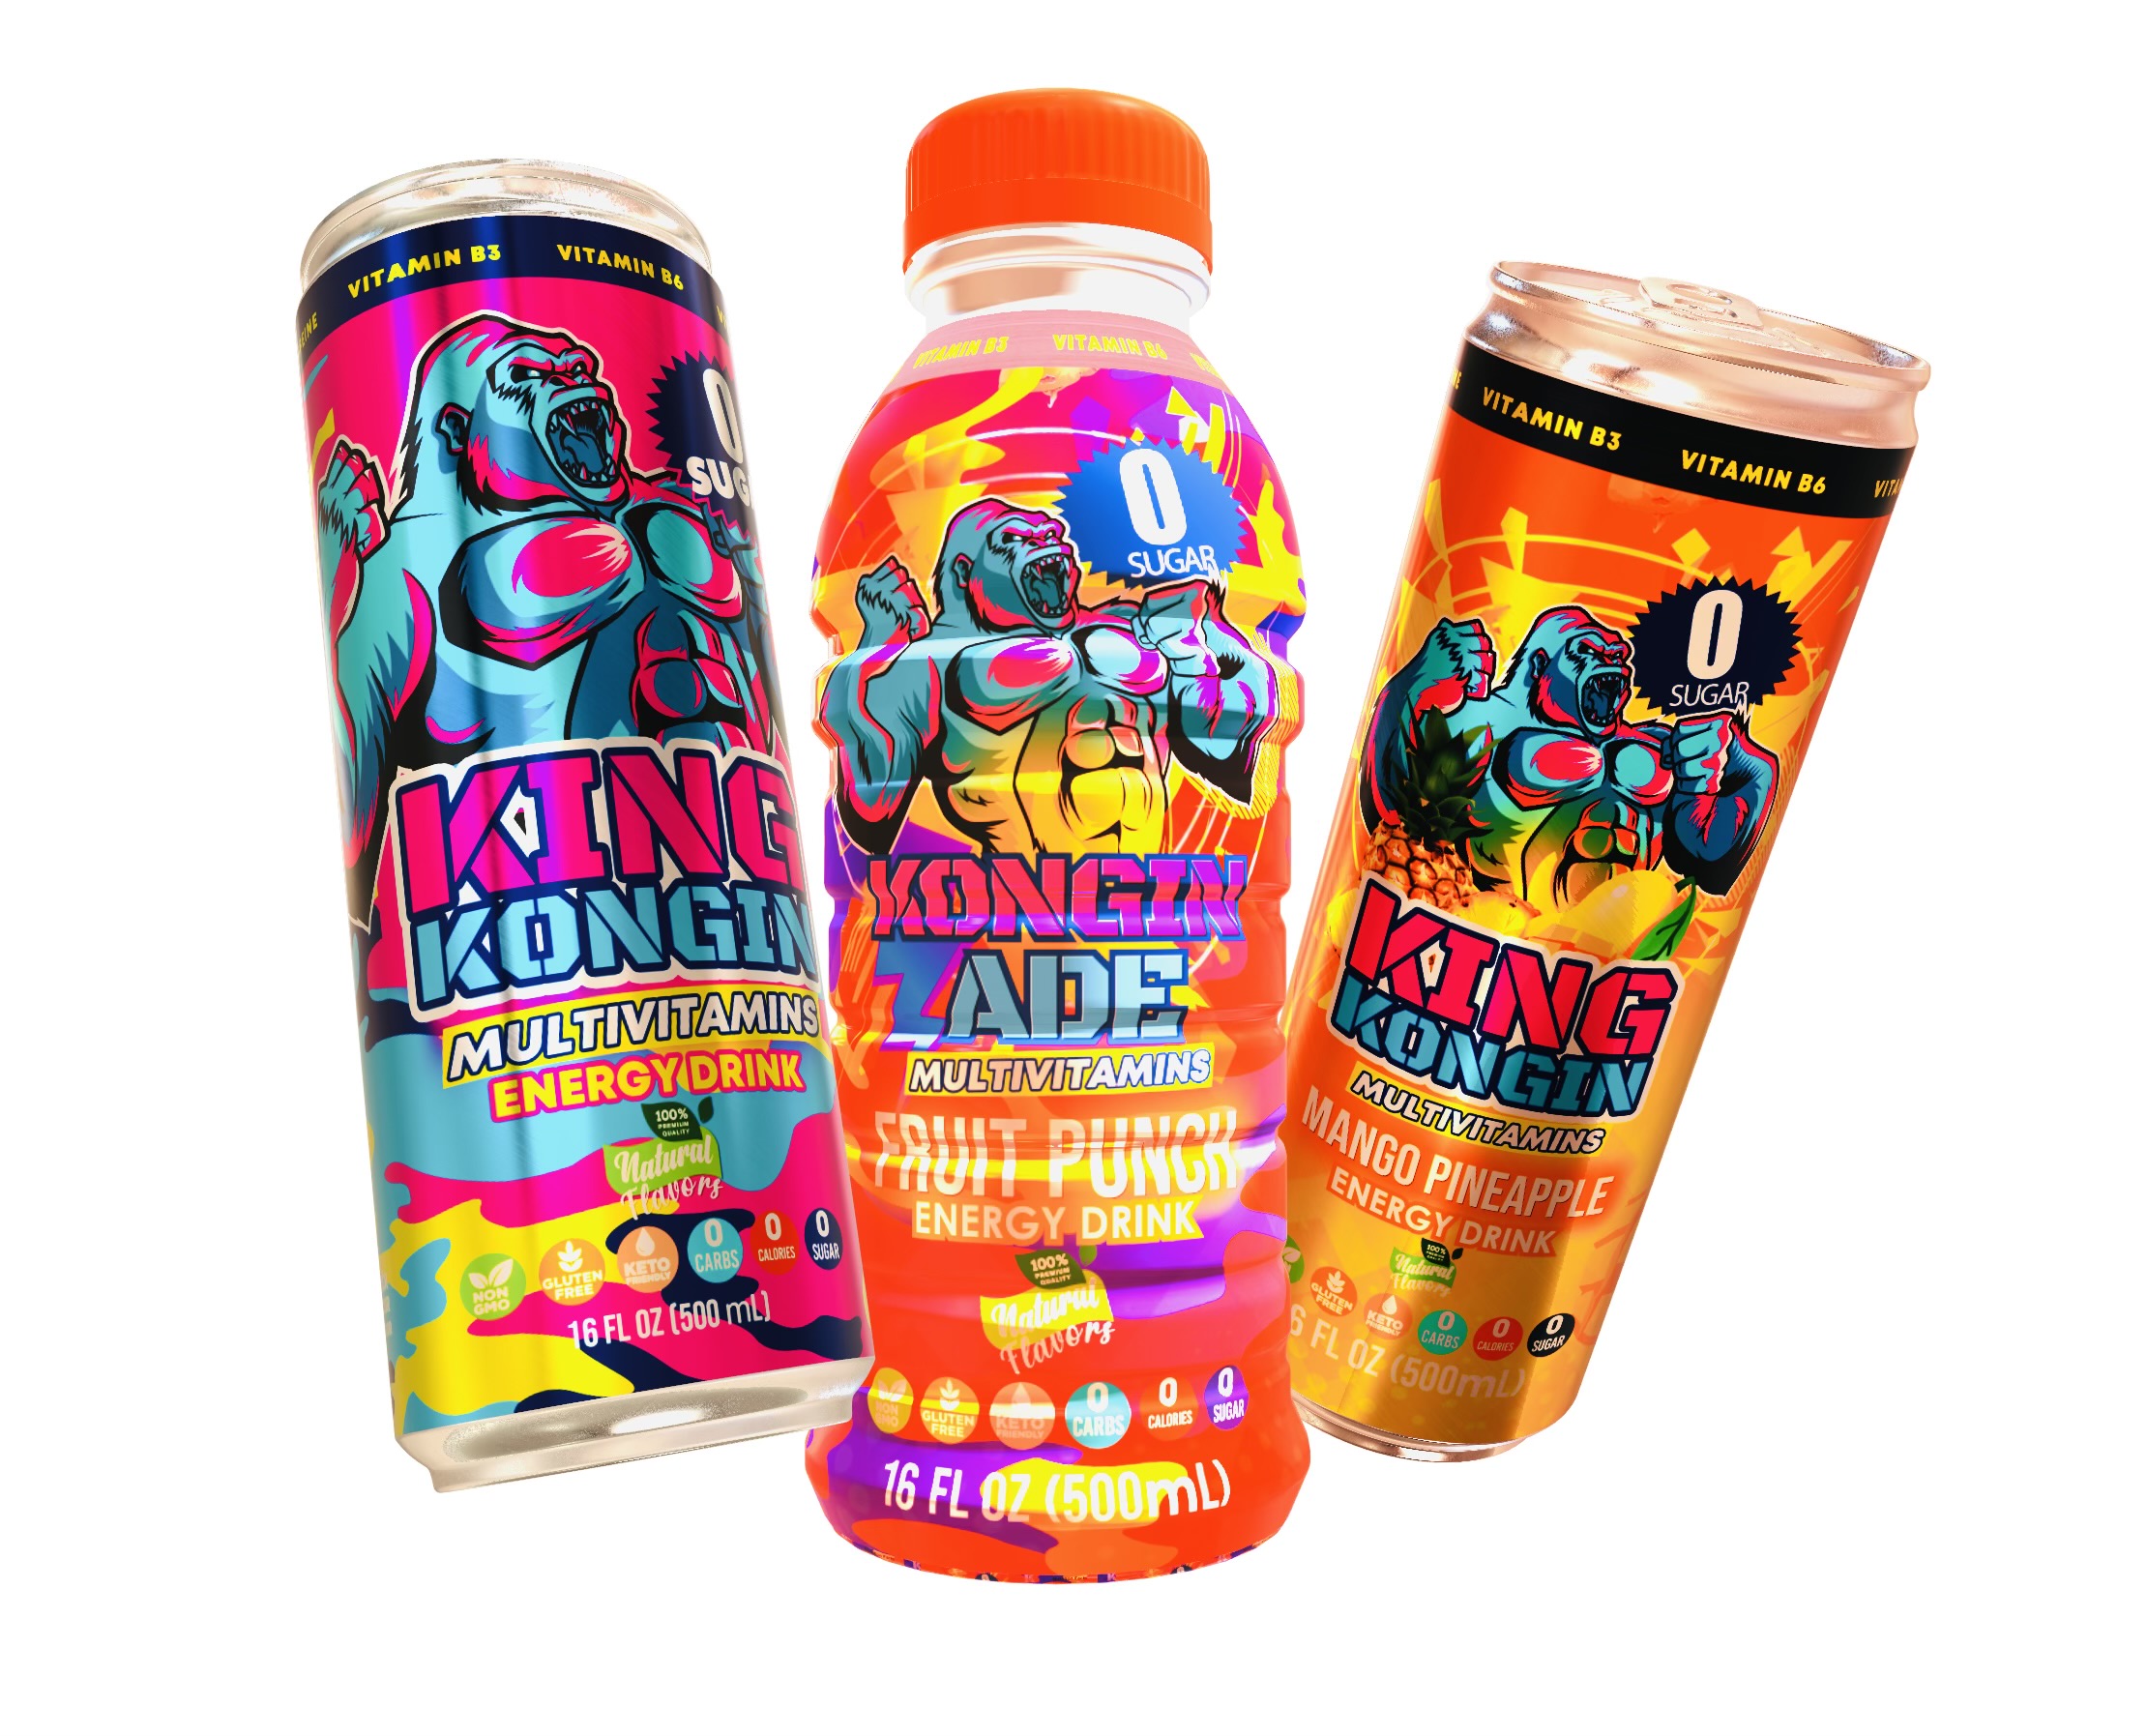 Vitamin Packed New Energy Drink King KongIn Offers All Natural Ingredients, Low Calories, A Stimulating Boost, And Mouth Watering Flavours 